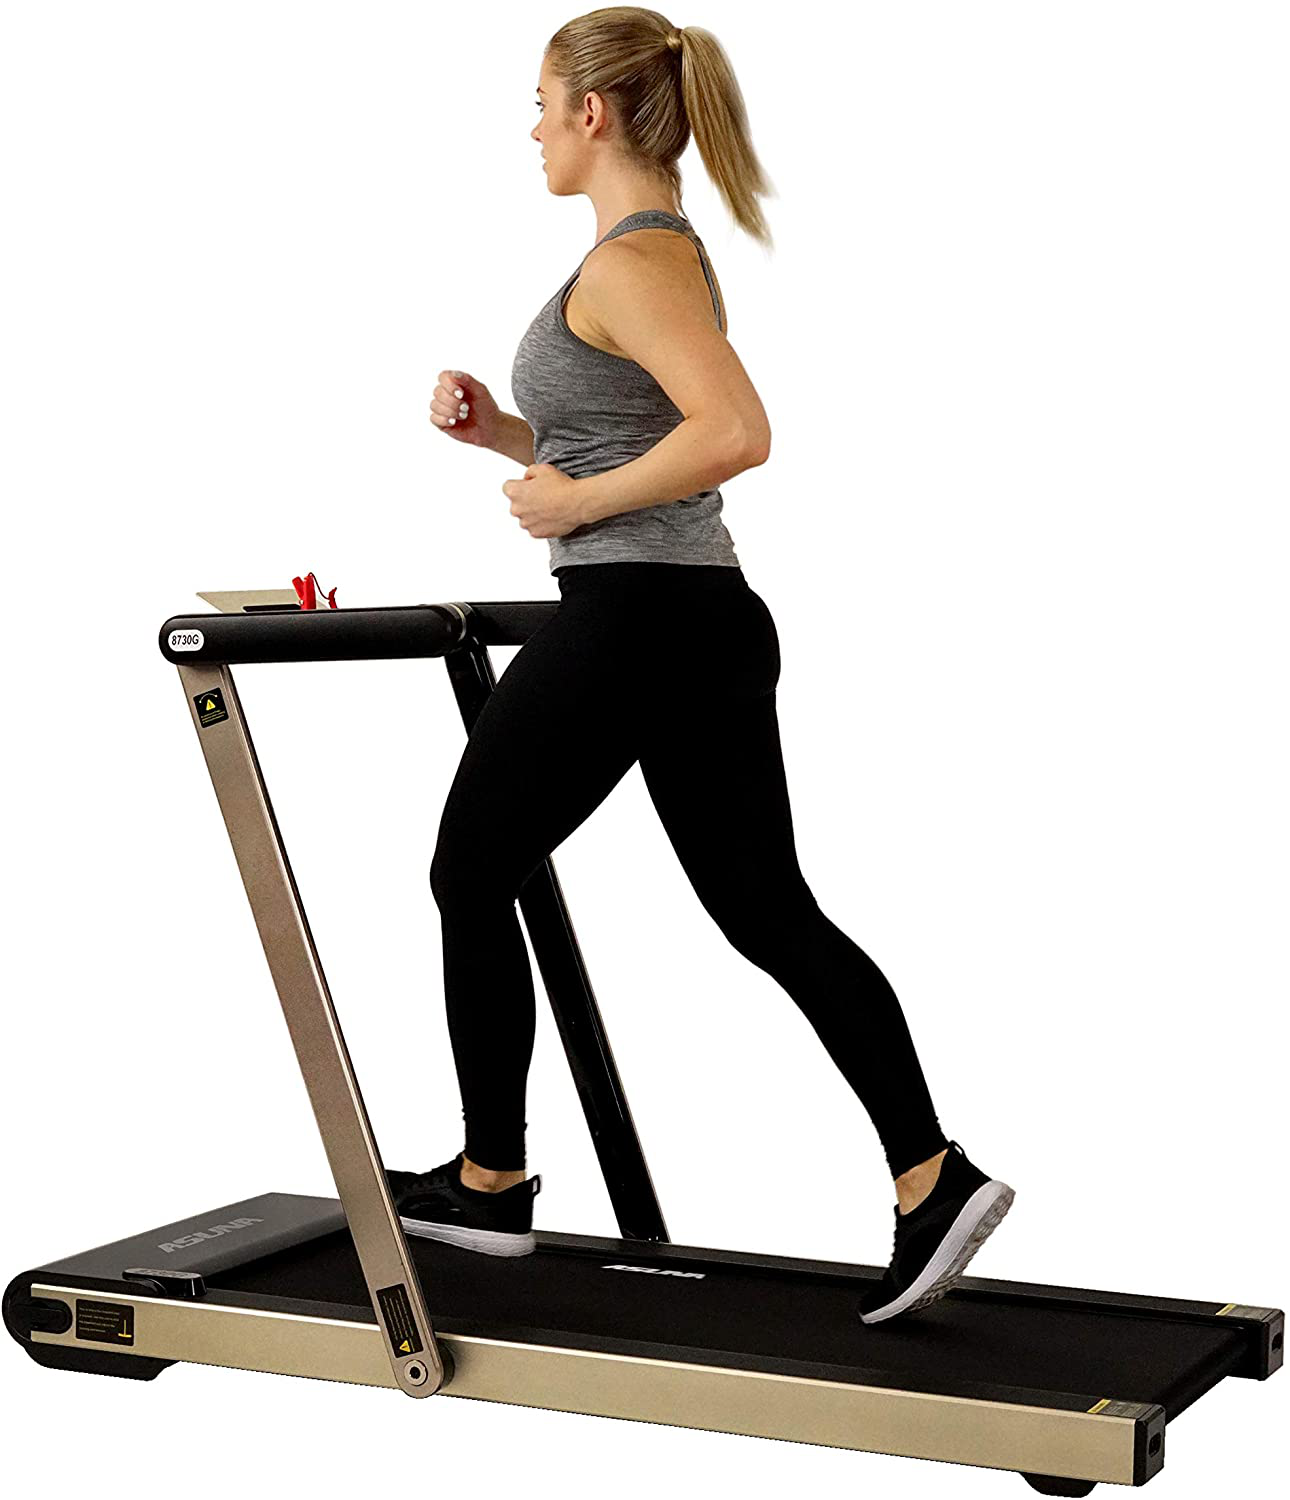 Sunny Health & Fitness ASUNA Premium Slim Folding Treadmill Running Machine with Speakers for Home Gyms Animals & Pet Supplies > Pet Supplies > Dog Supplies > Dog Treadmills Sunny Health & Fitness 8730G  